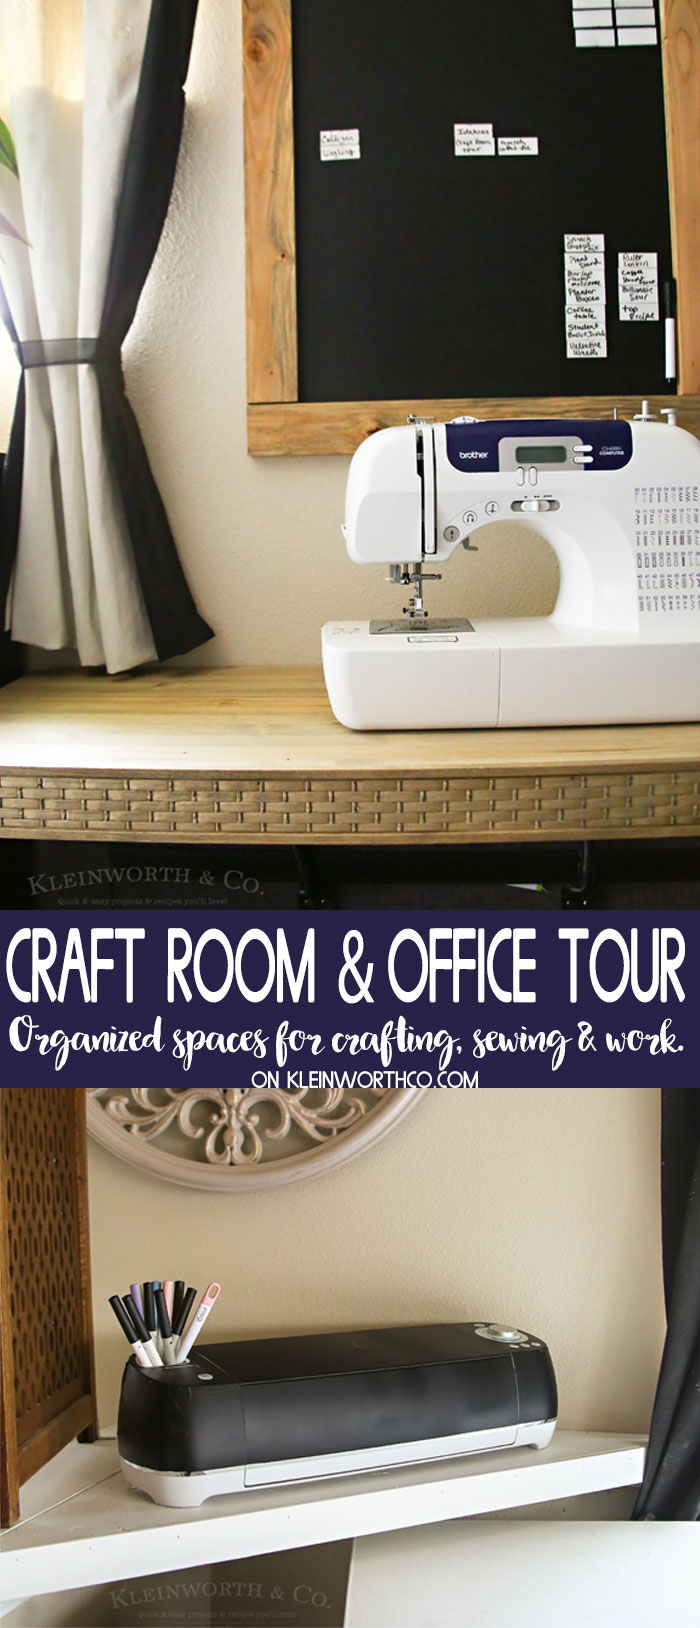 Craft Room & Office Tour 2018